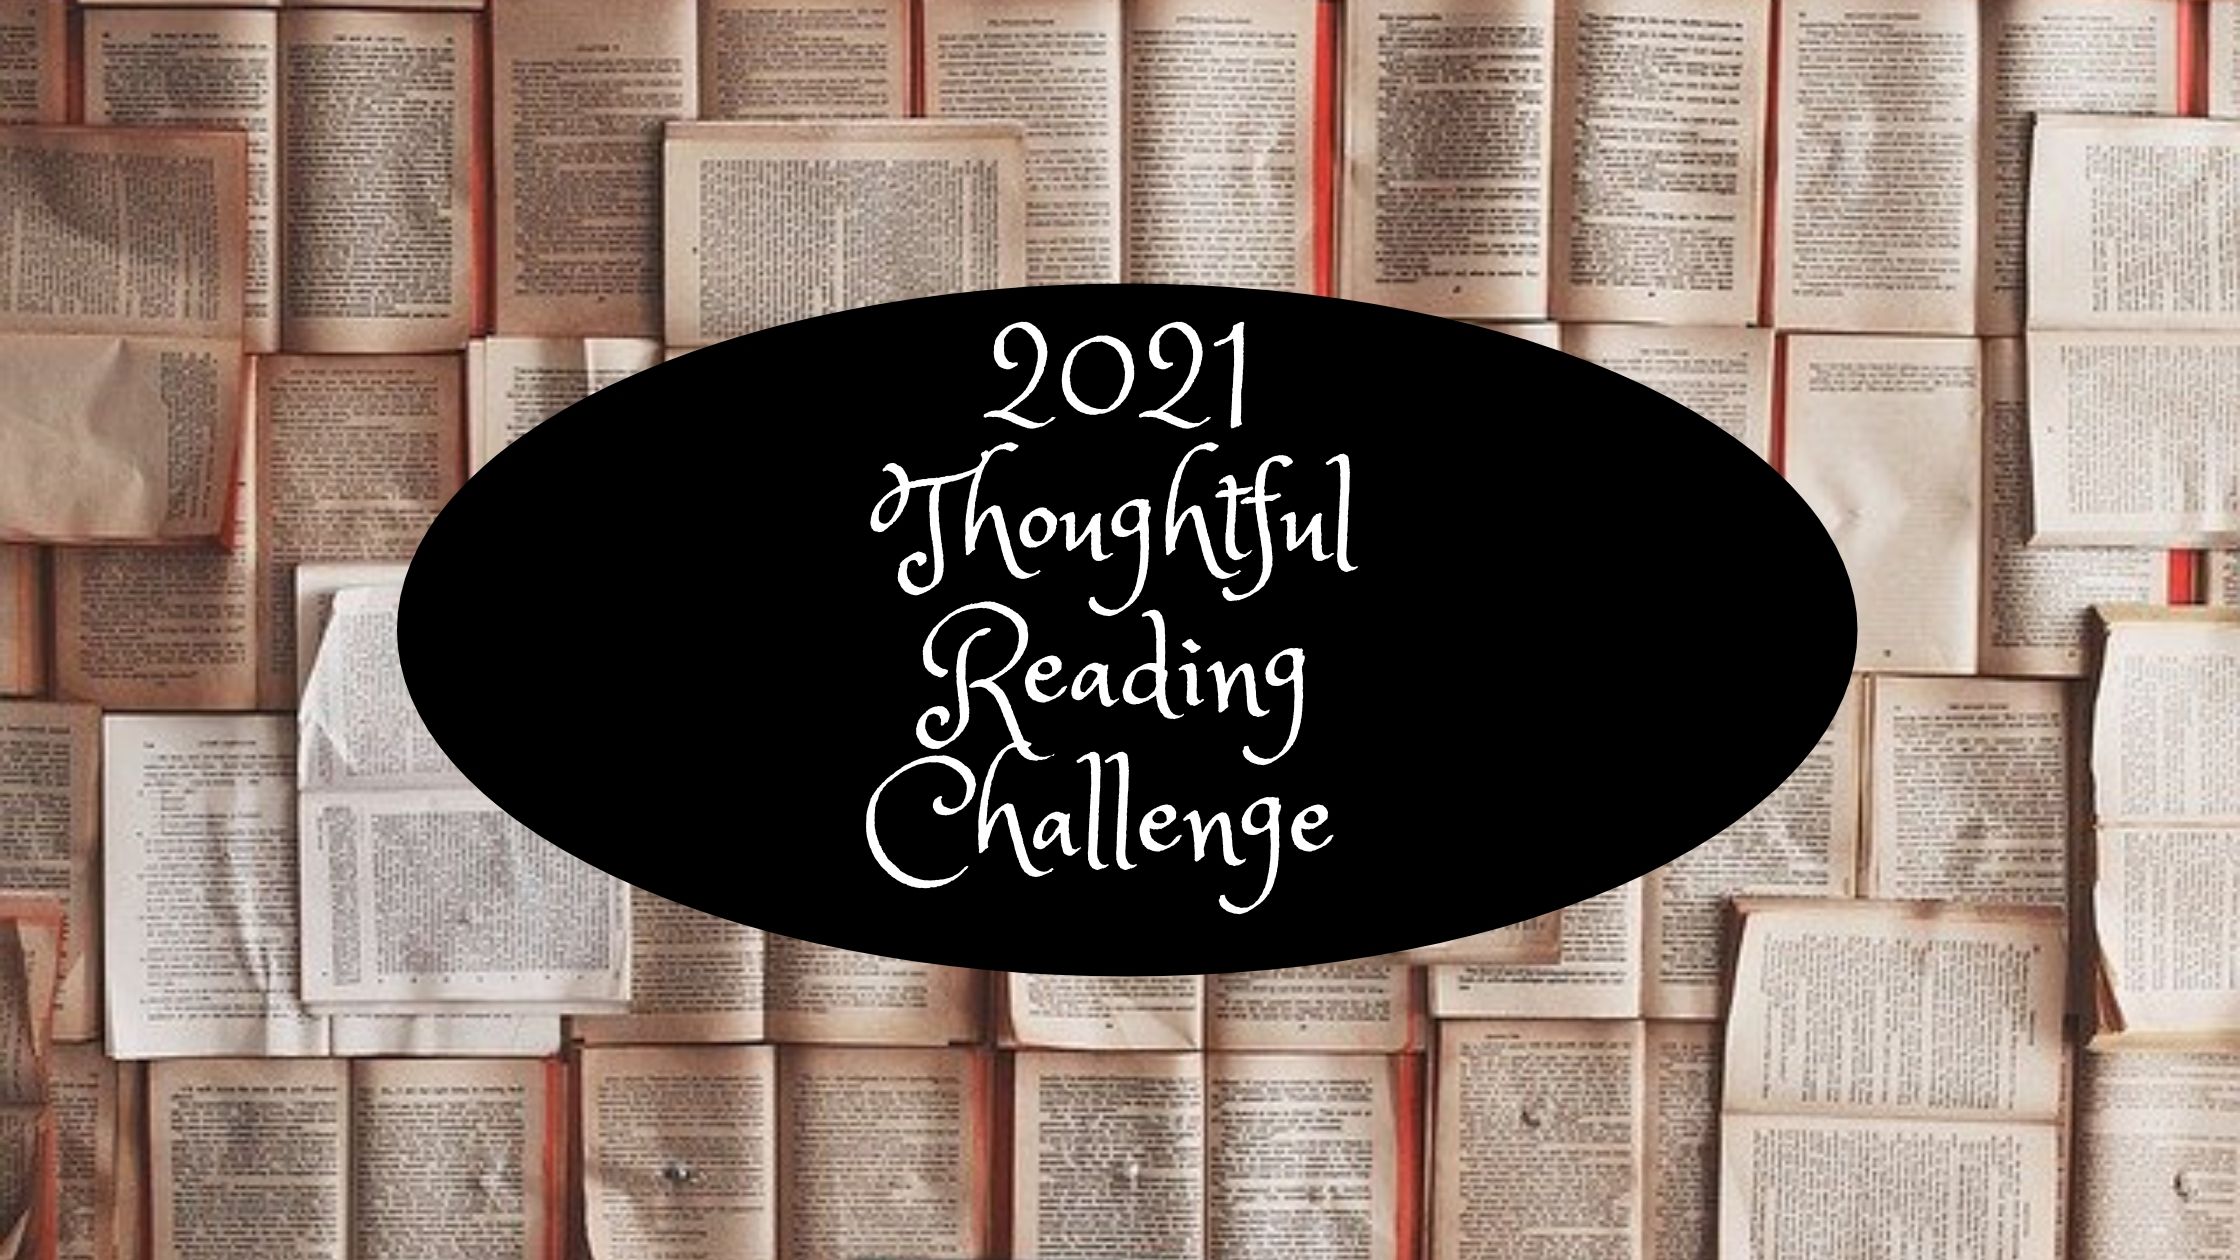 2021 Thoughtful Reading Challenge (1)